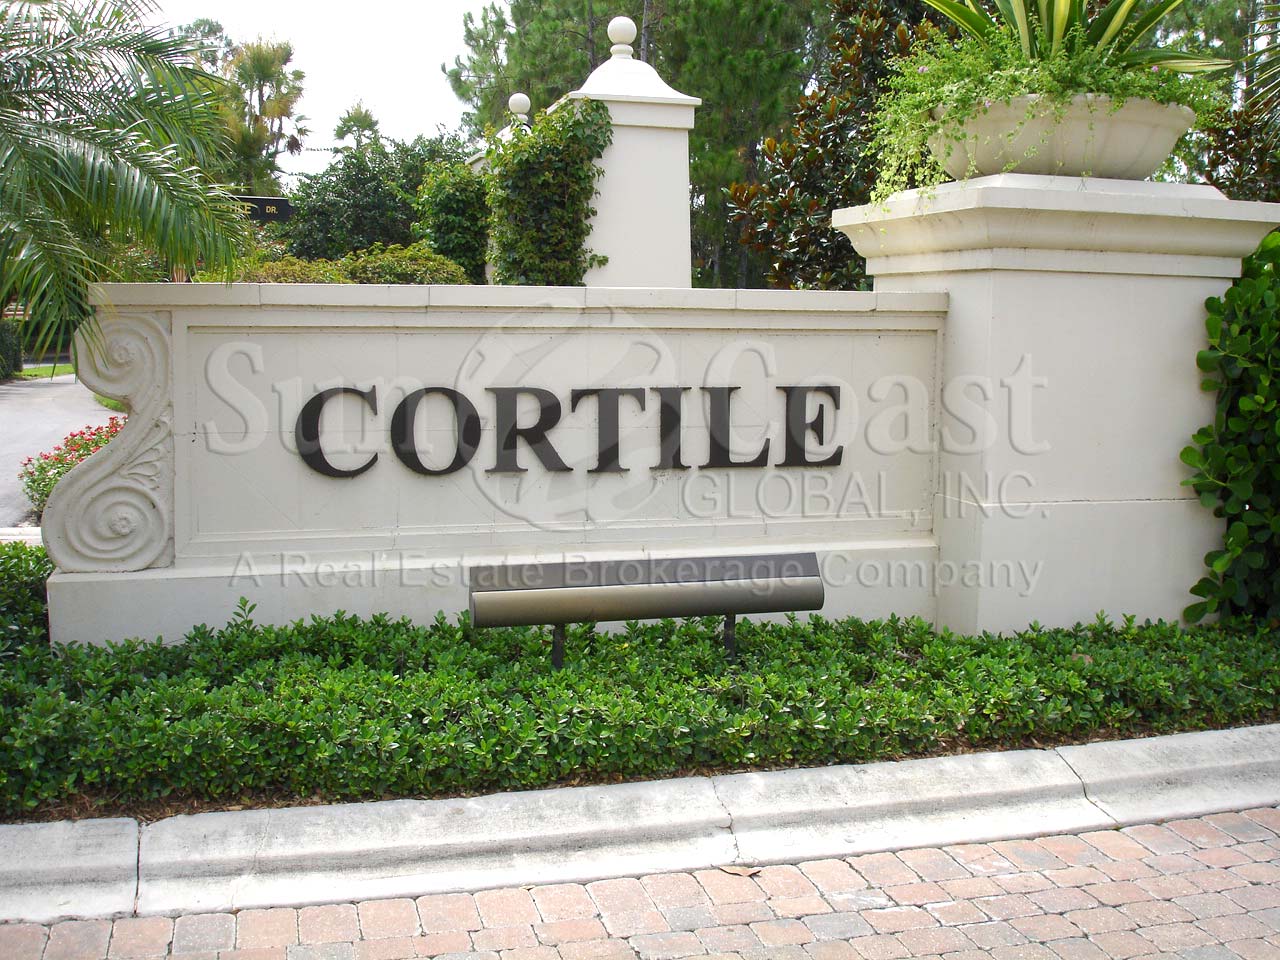 Cortile sign